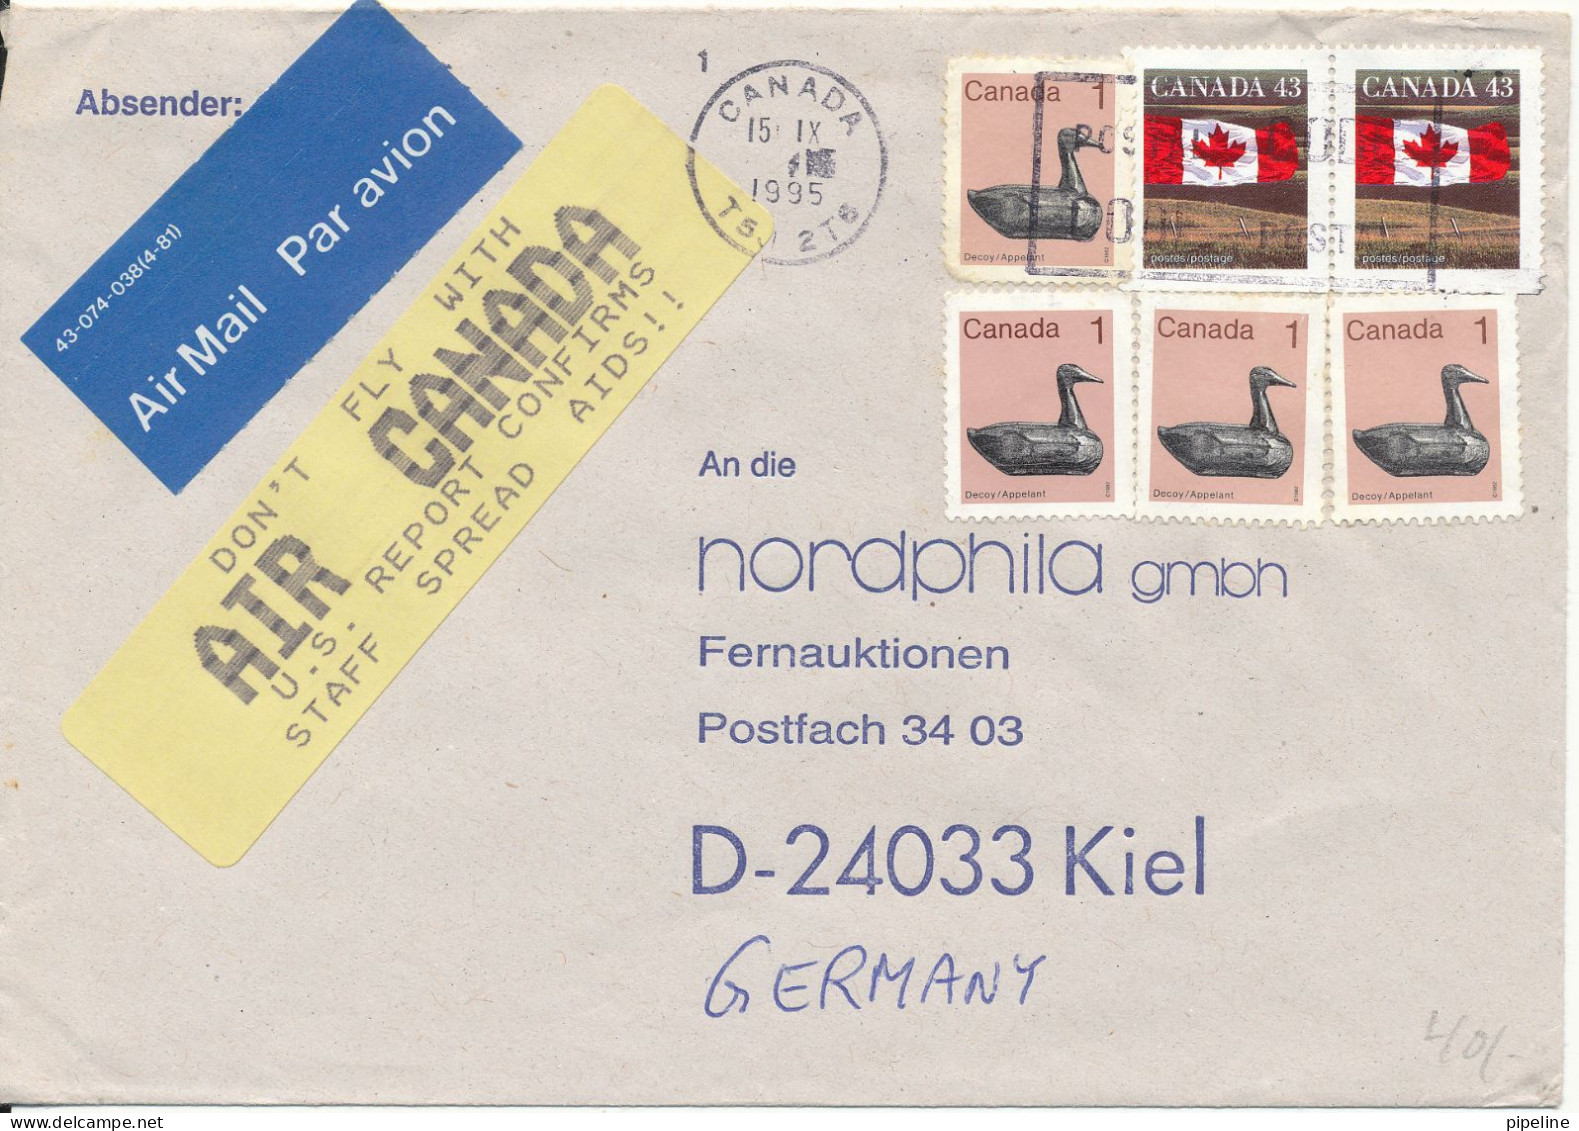 Canada Cover Sent To Germany 15-9-1995 Topic Stamps (see The Yellow Label On The Cover) - Covers & Documents